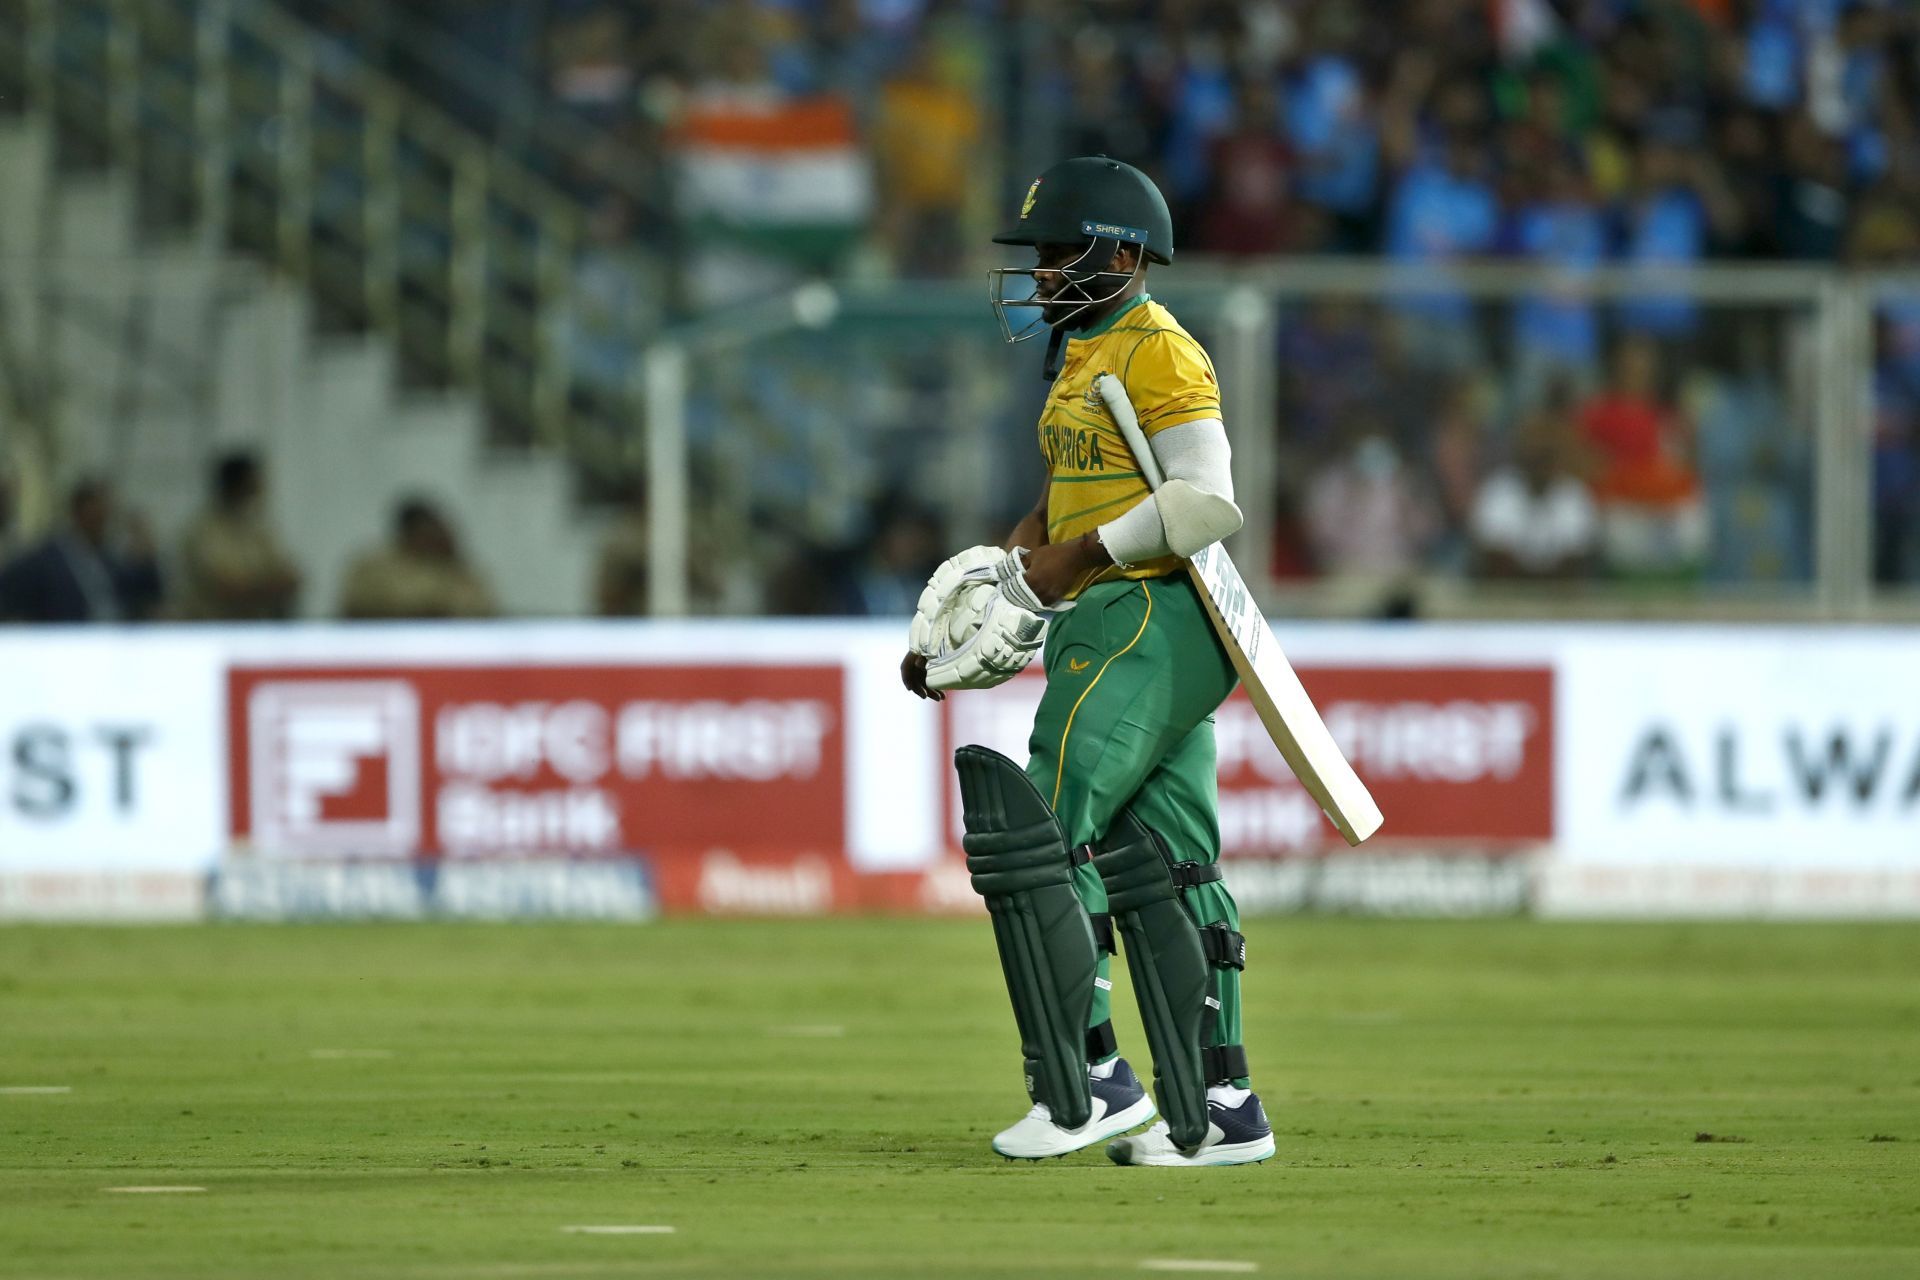 1st T20 International: India v South Africa (Image: Getty)